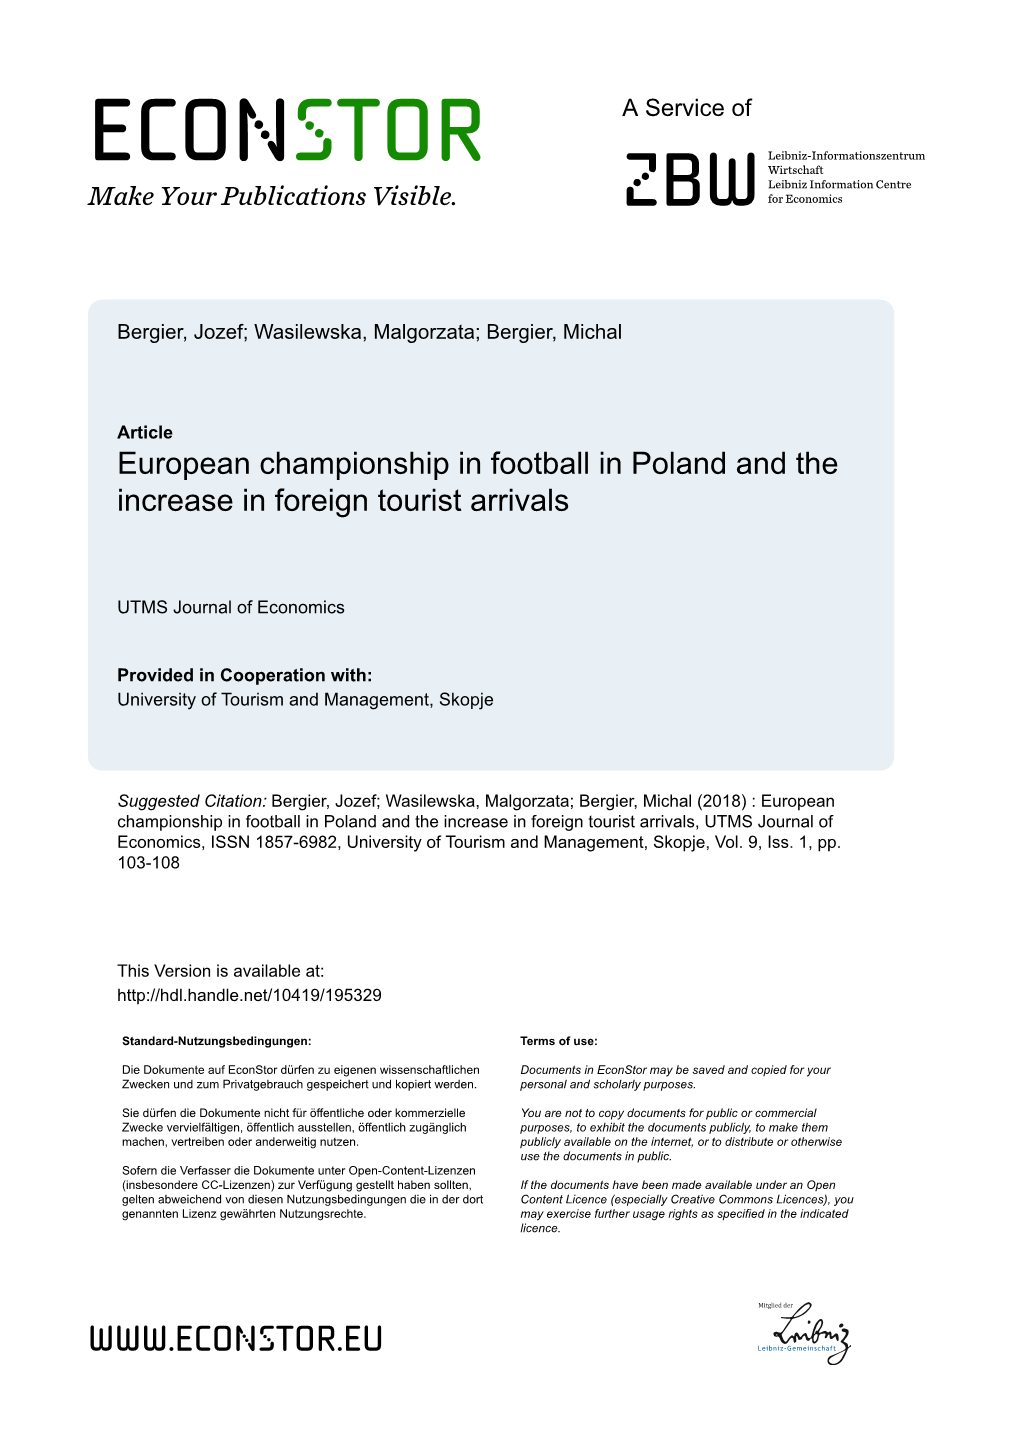 European Championship in Football in Poland and the Increase in Foreign Tourist Arrivals